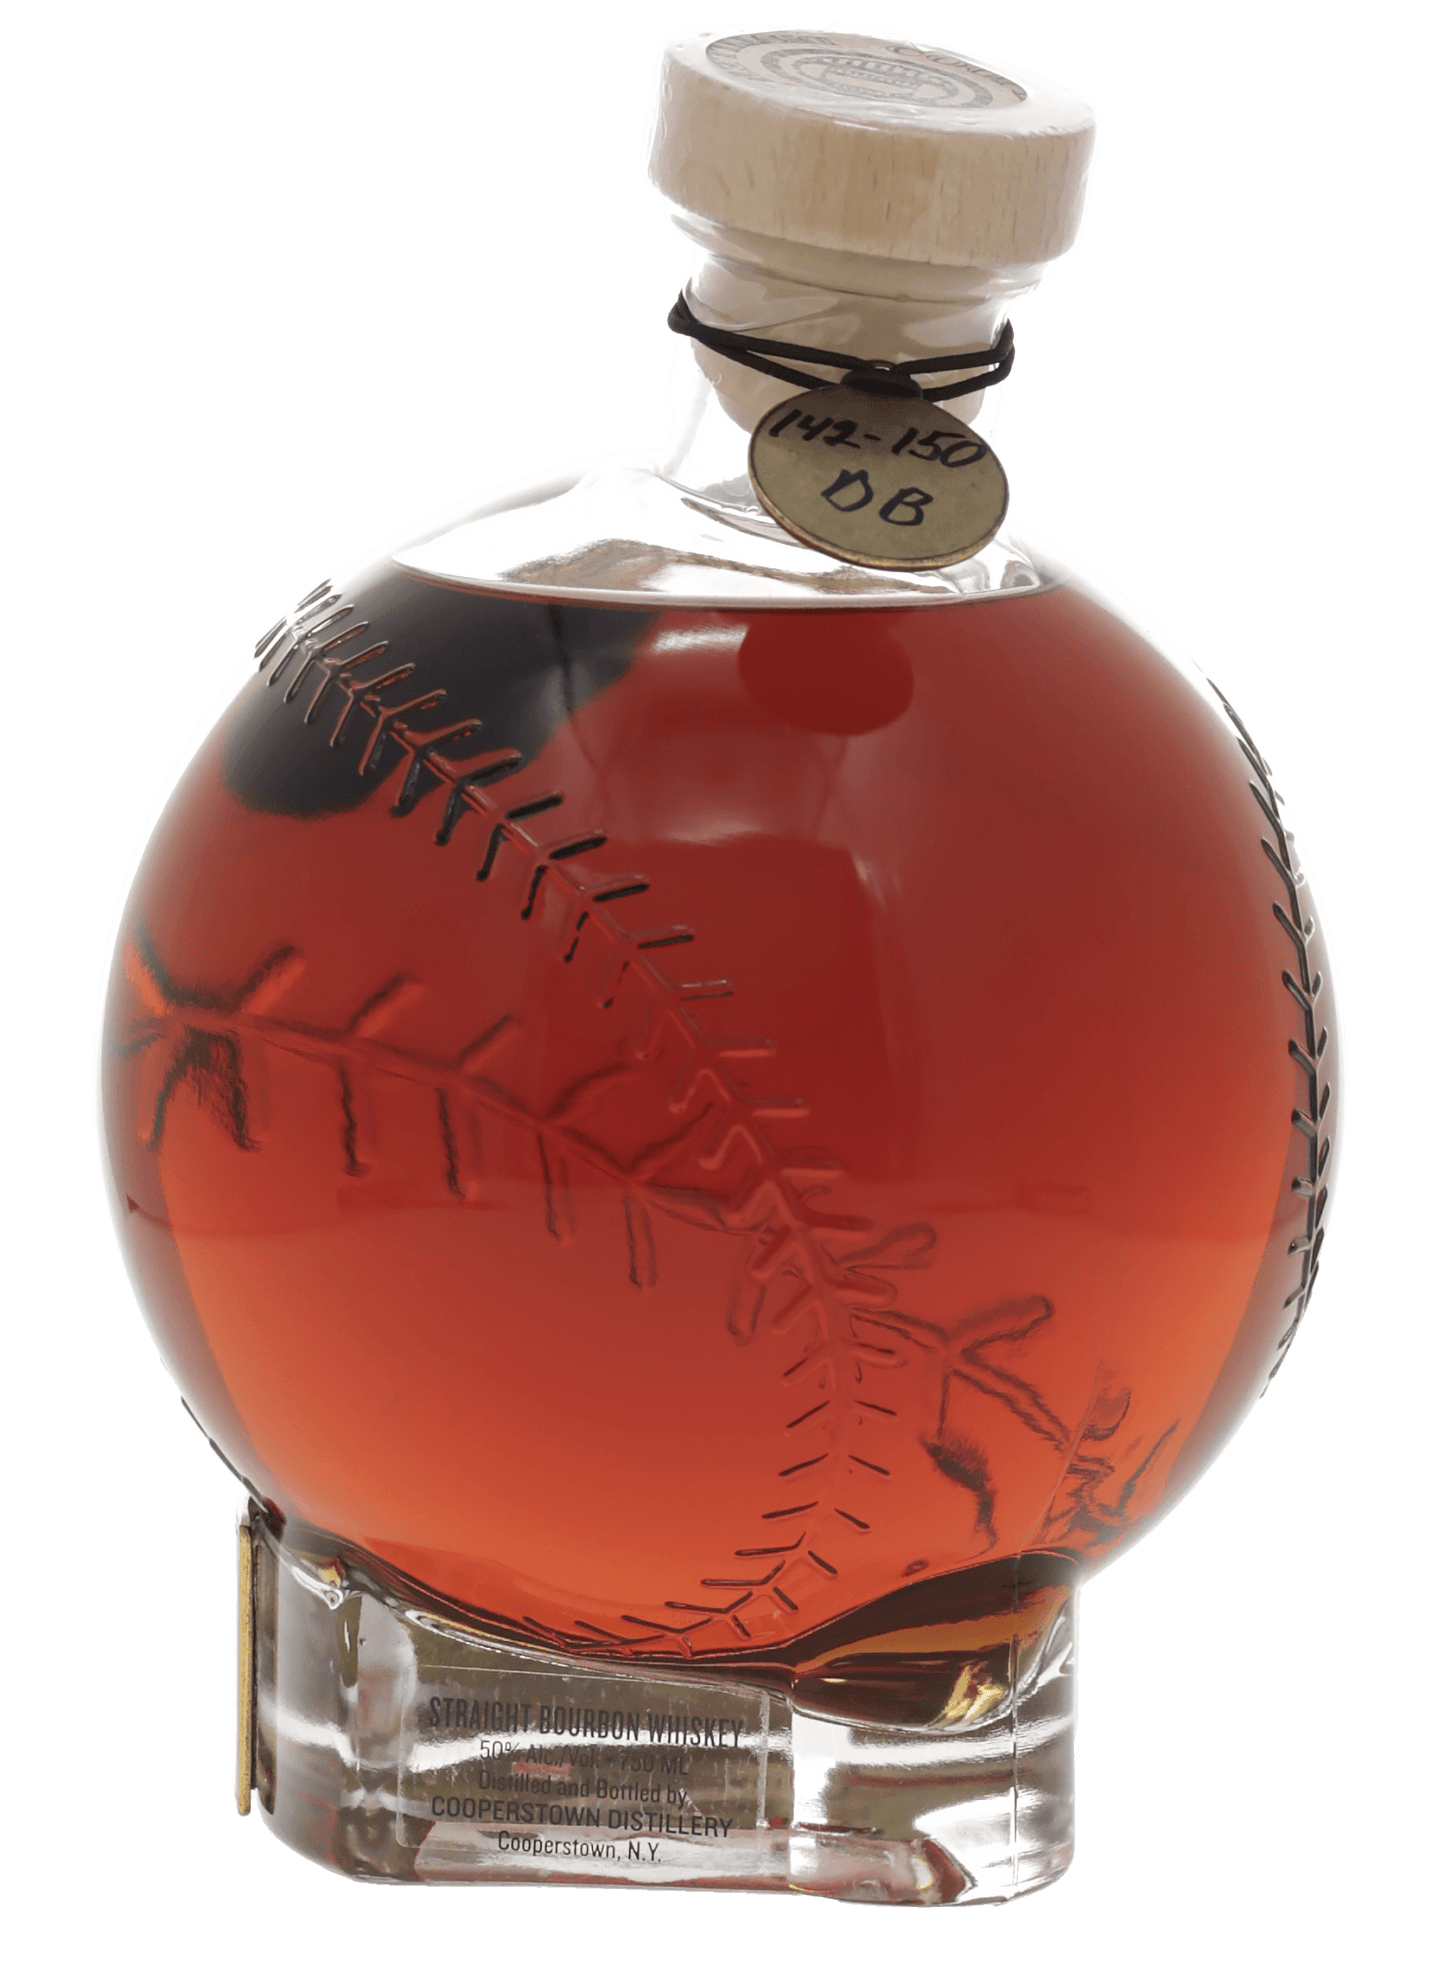 Cooperstown Select Straight Bourbon Whiskey- Limited Edition